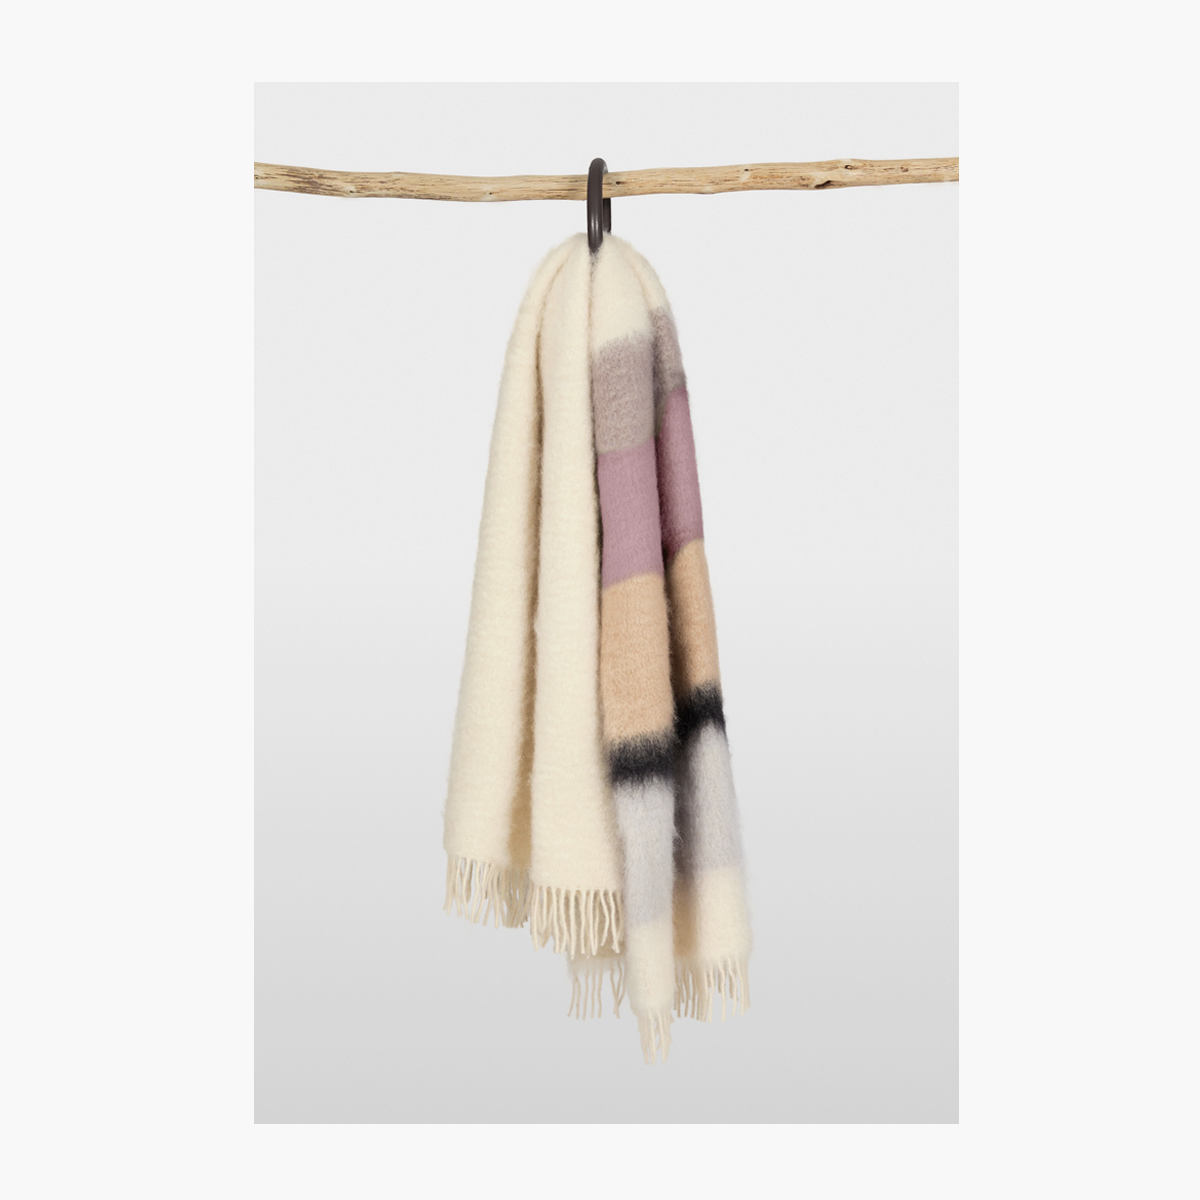 Mantas Ezcaray Serenity No. 21 Striped Mohair and Wool-Blend Throw 